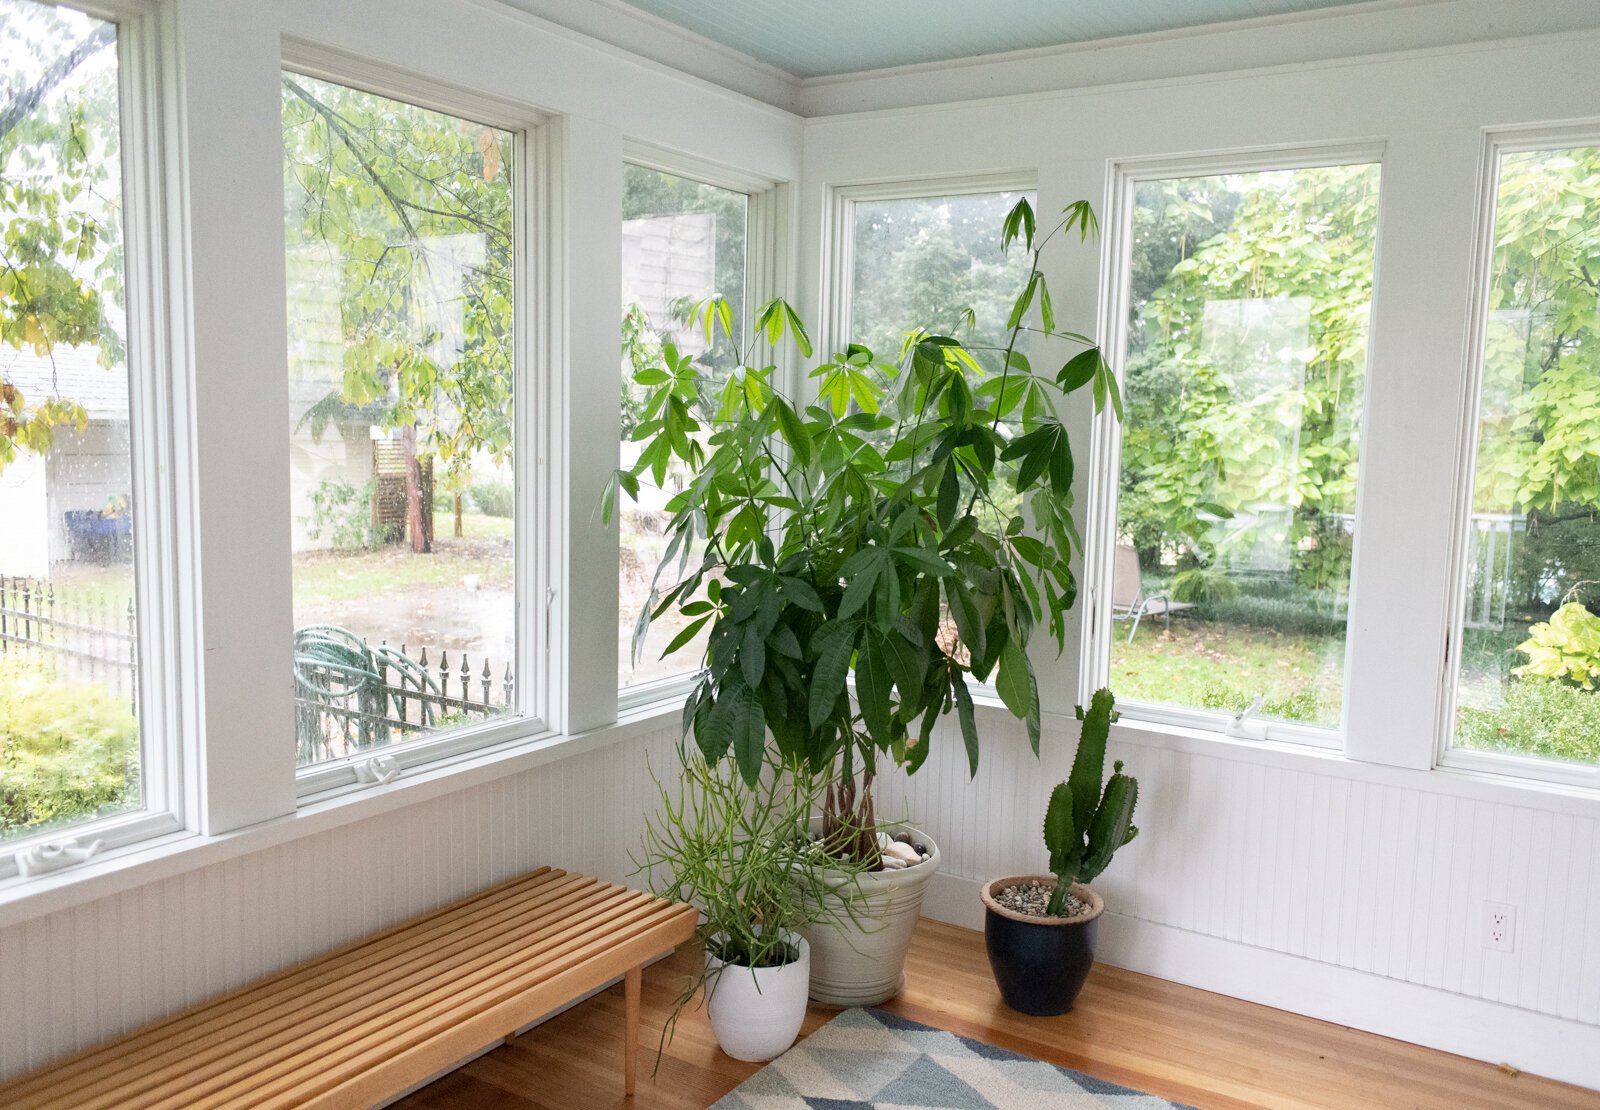 Plants and natural light fill the entryway patio area.